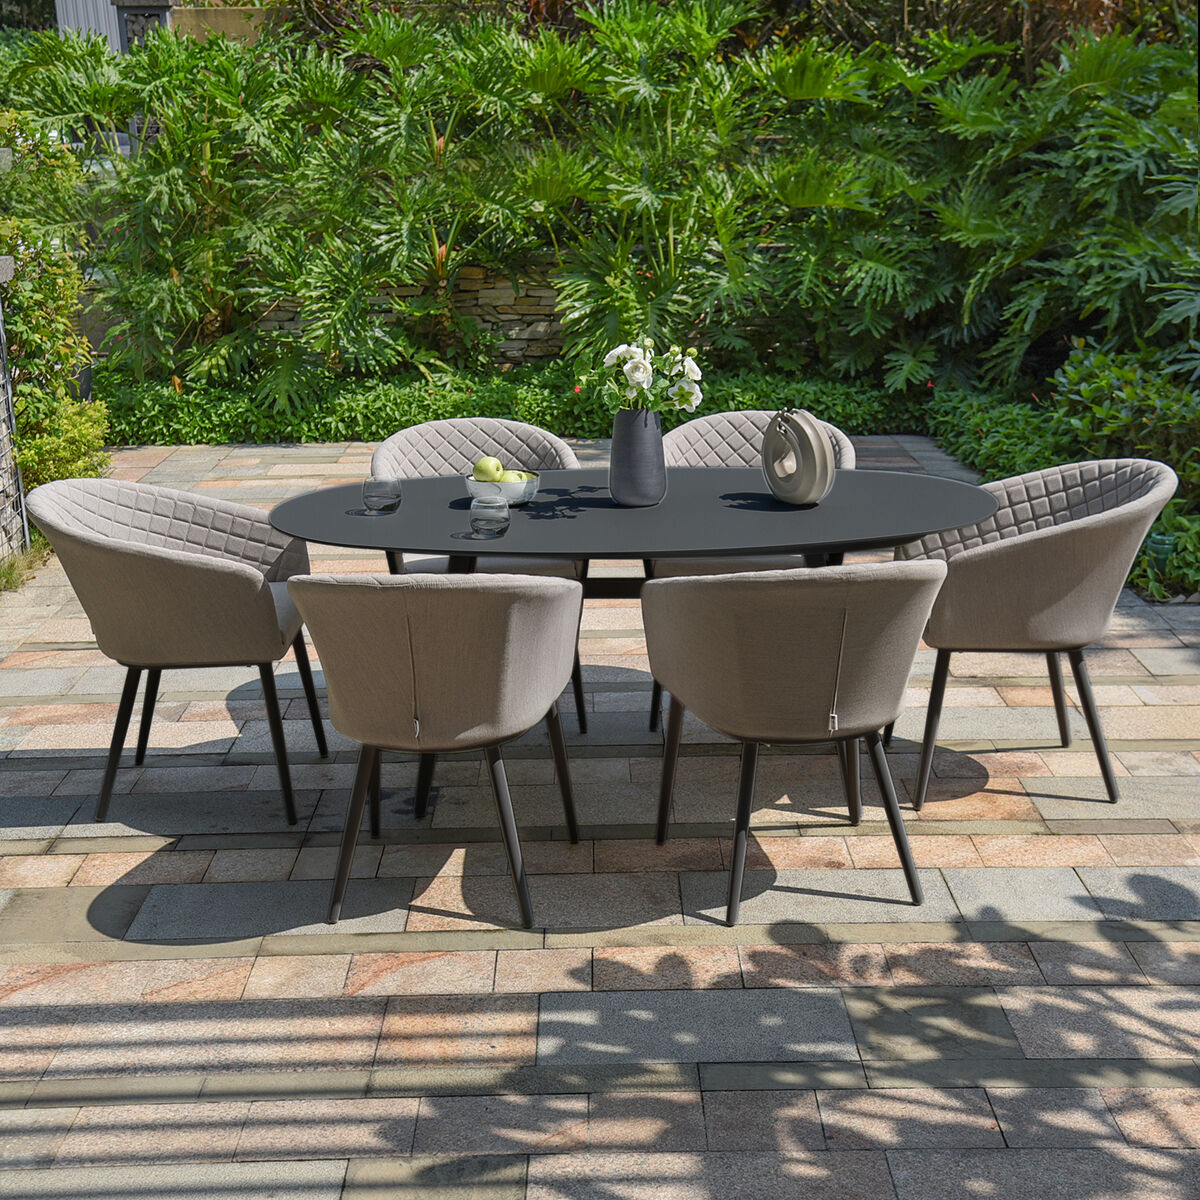 Maze - Outdoor Fabric Ambition 6 Seat Oval Dining Set - Taupe product image